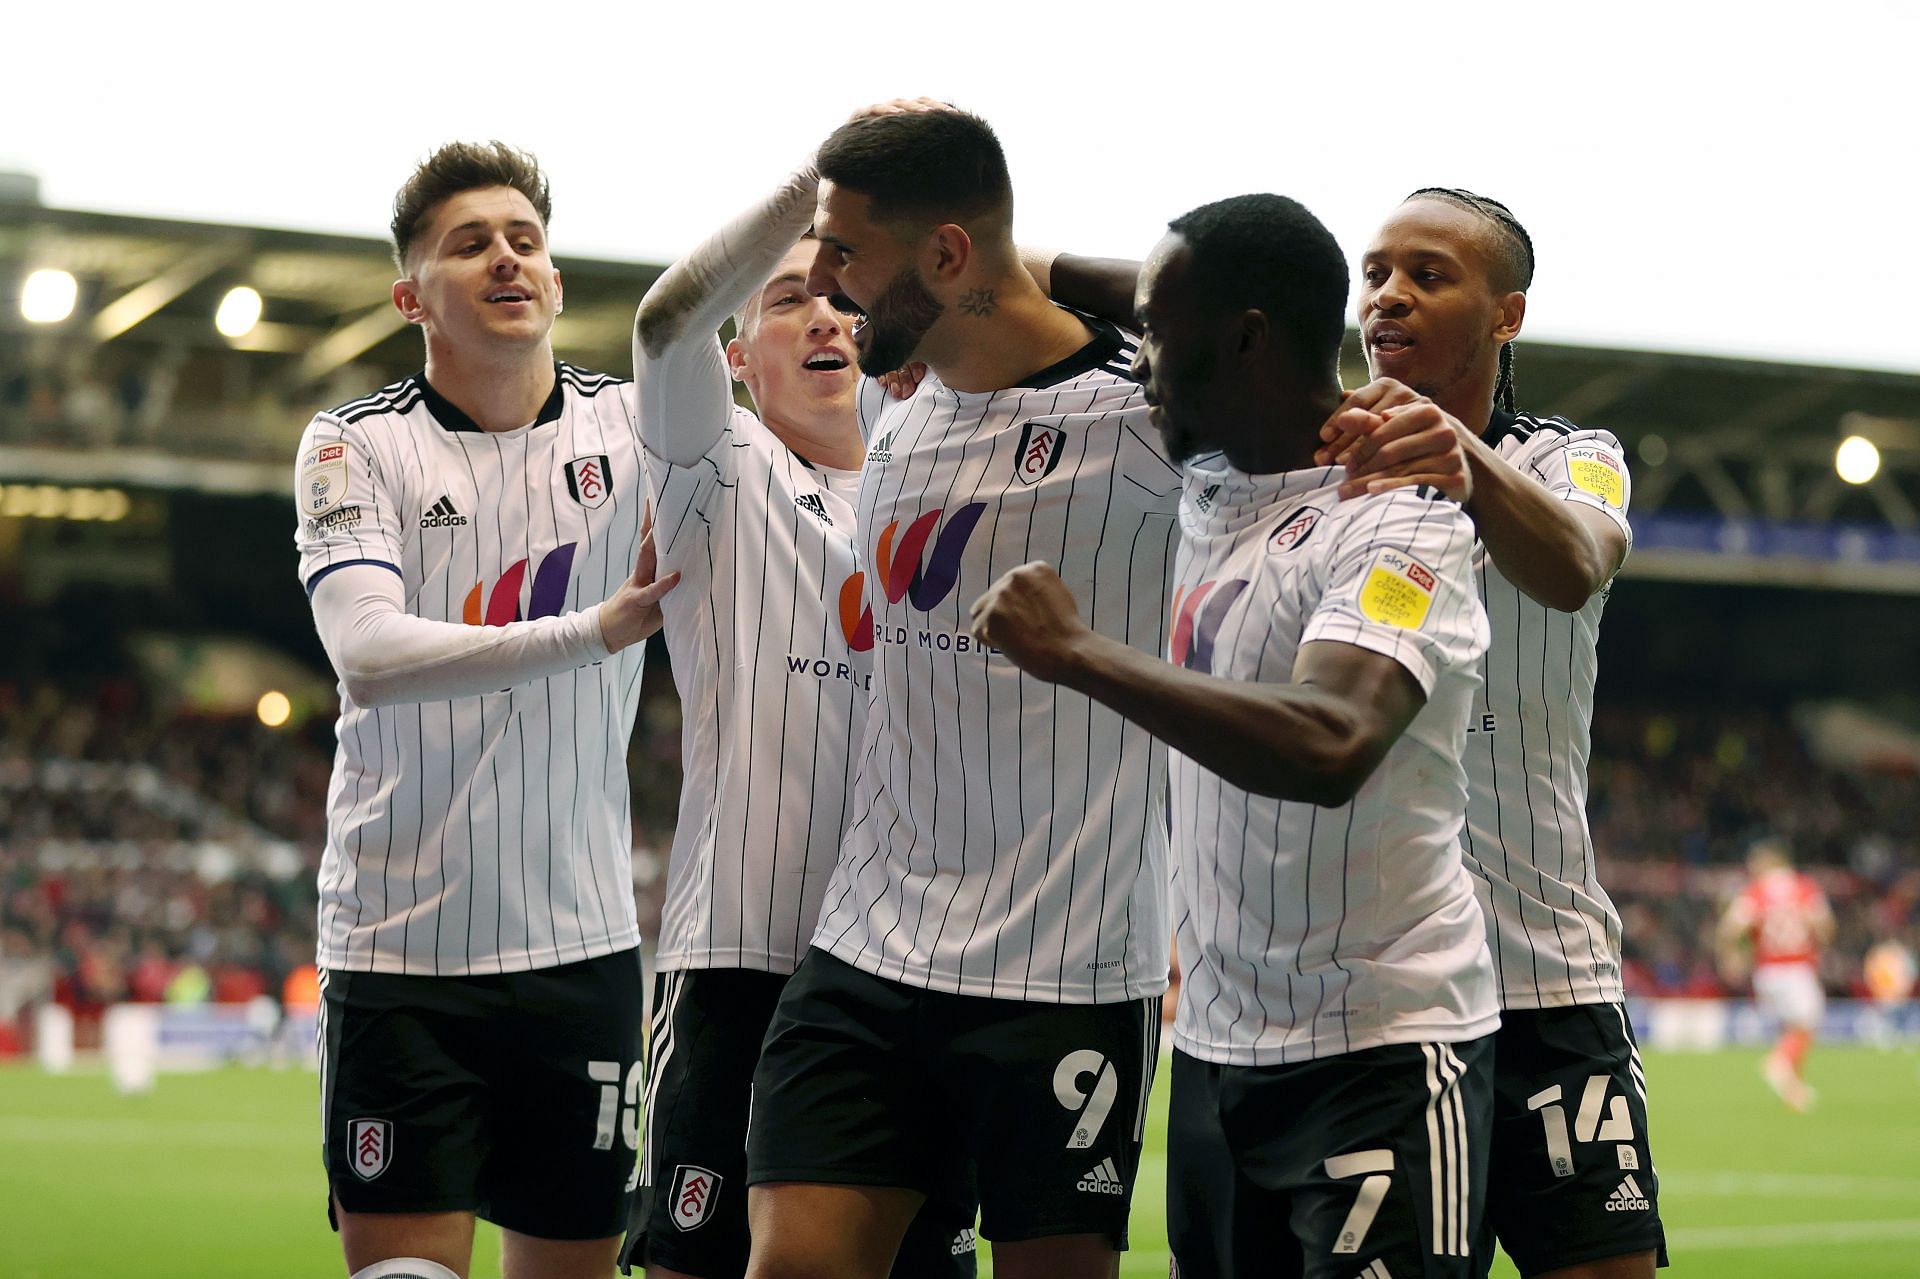 Fulham will host West Bromwich Albion on Saturday - Sky Bet Championship